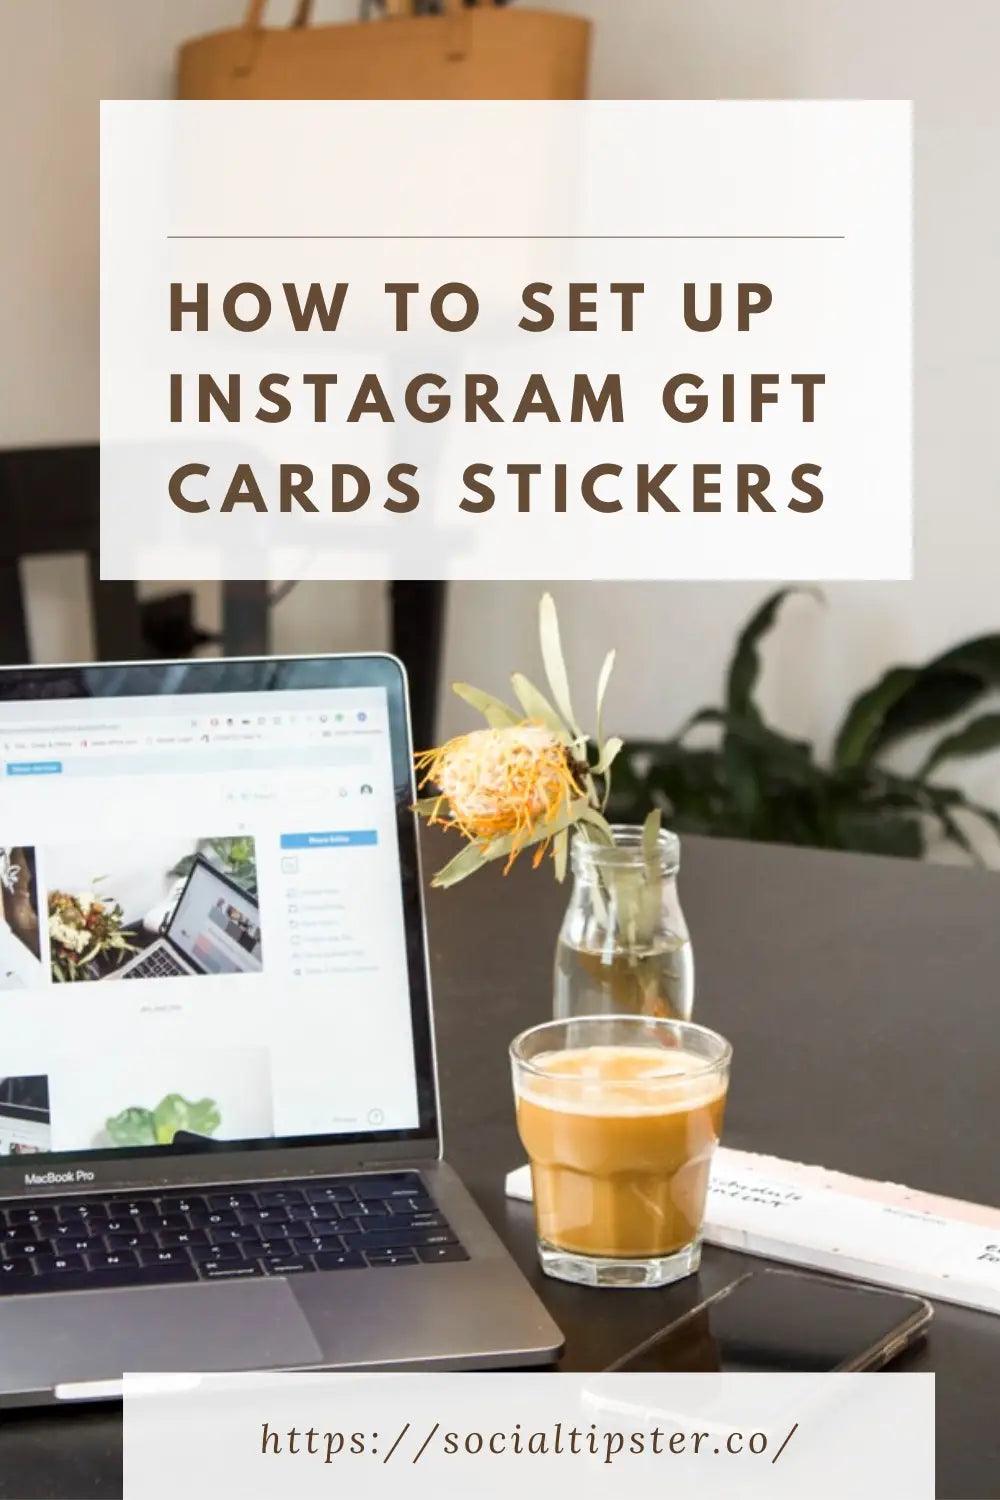 How to Set Up Instagram Gift Cards Stickers;hHow to Set Up Instagram Gift Cards Stickers